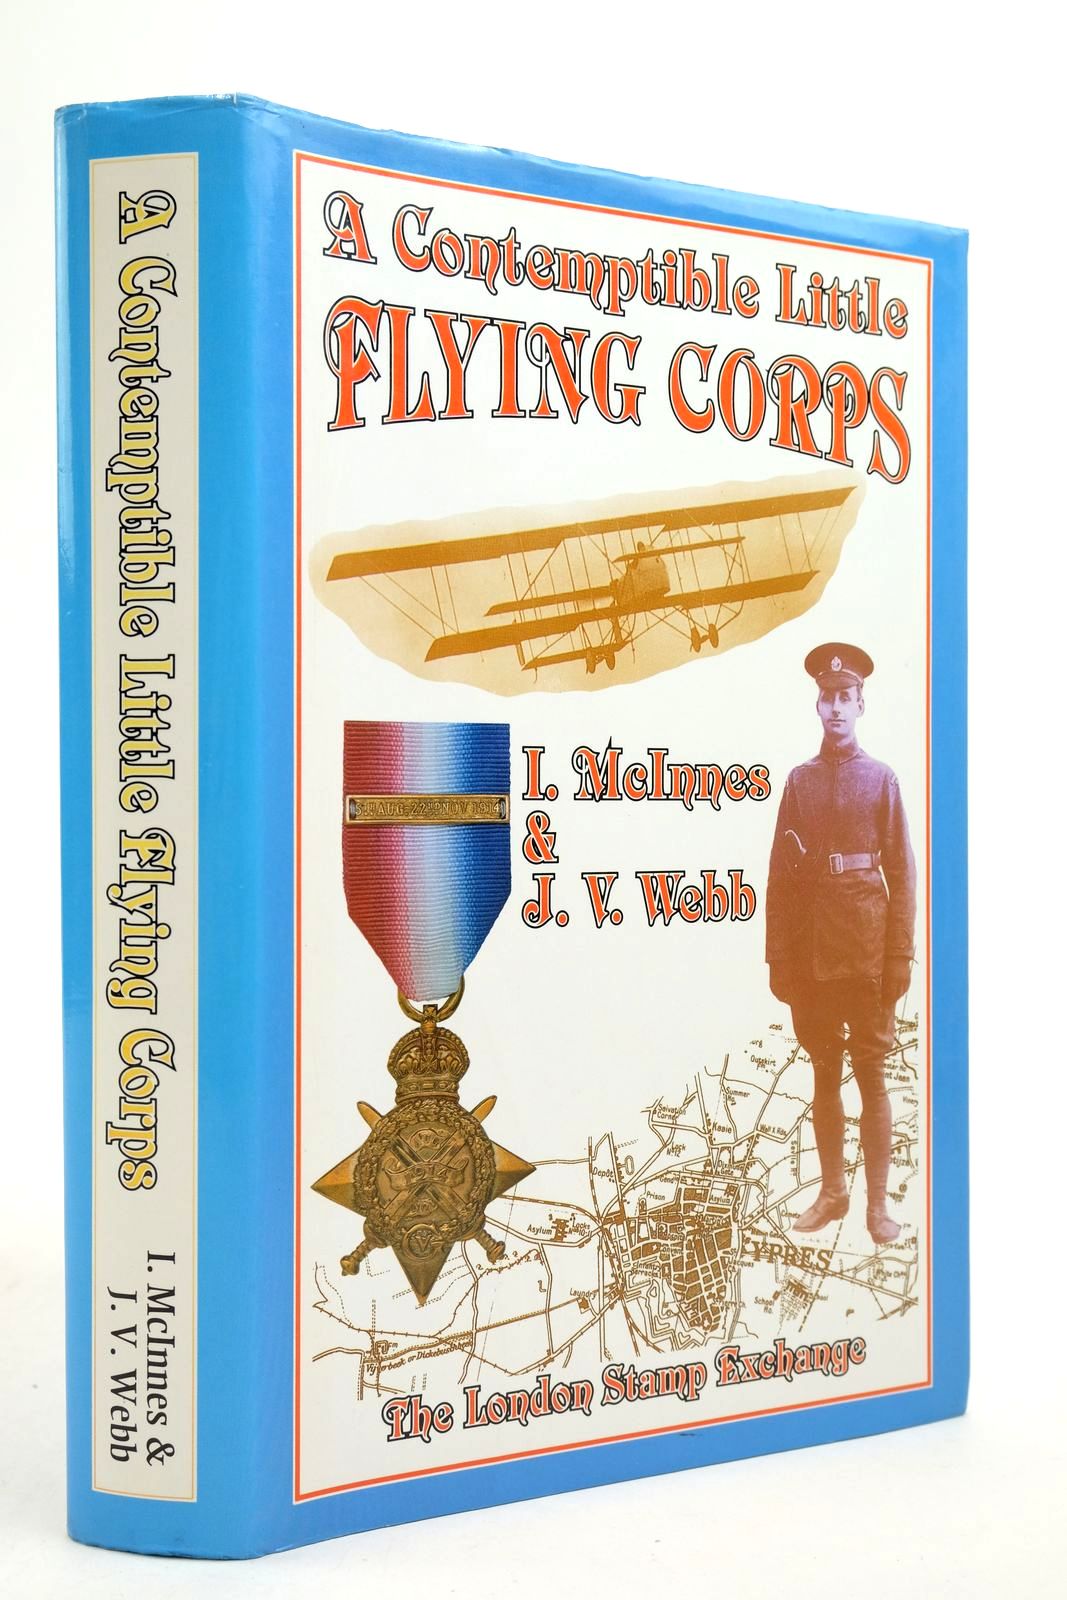 Photo of A CONTEMPTIBLE LITTLE FLYING CORPS written by McInnes, Ian Webb, J.V. published by The London Stamp Exchange (STOCK CODE: 2139994)  for sale by Stella & Rose's Books